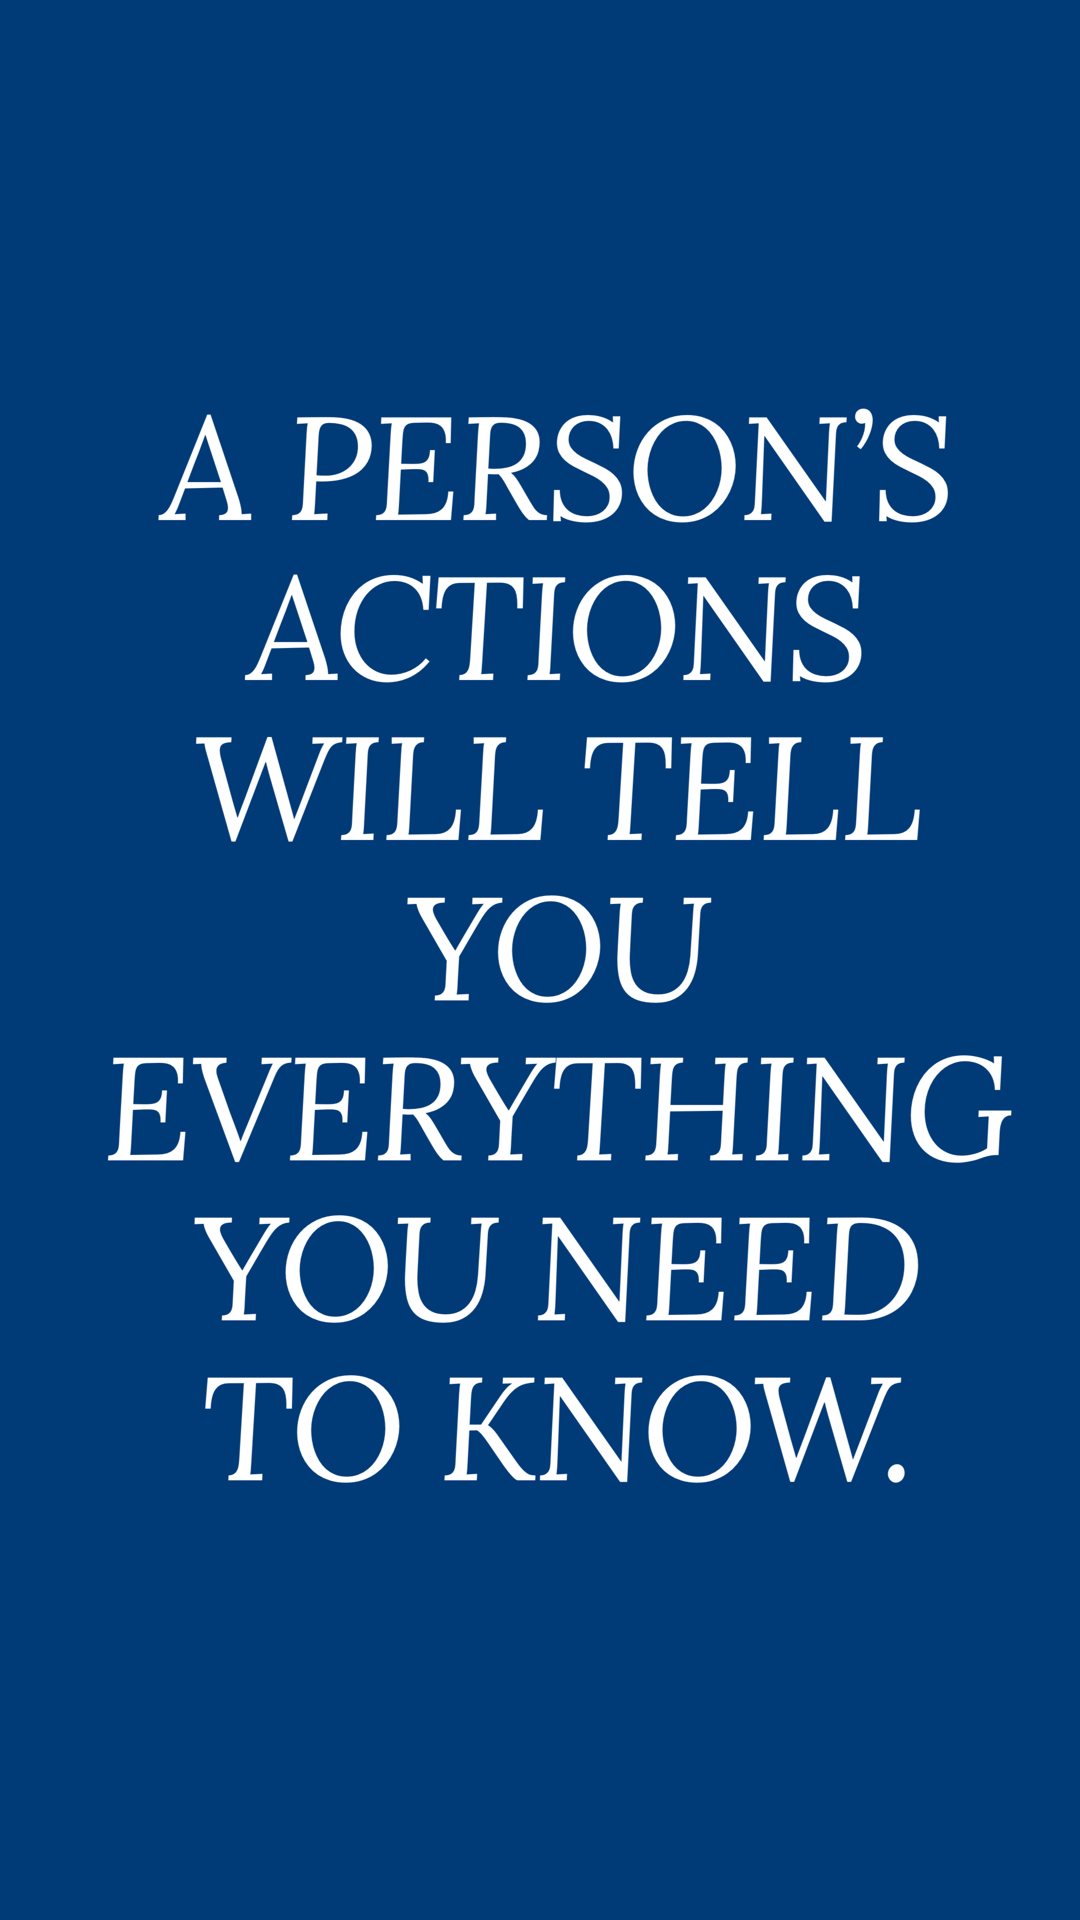 Actions Speak Louder Than Words Quotes - 1080x1920 ...